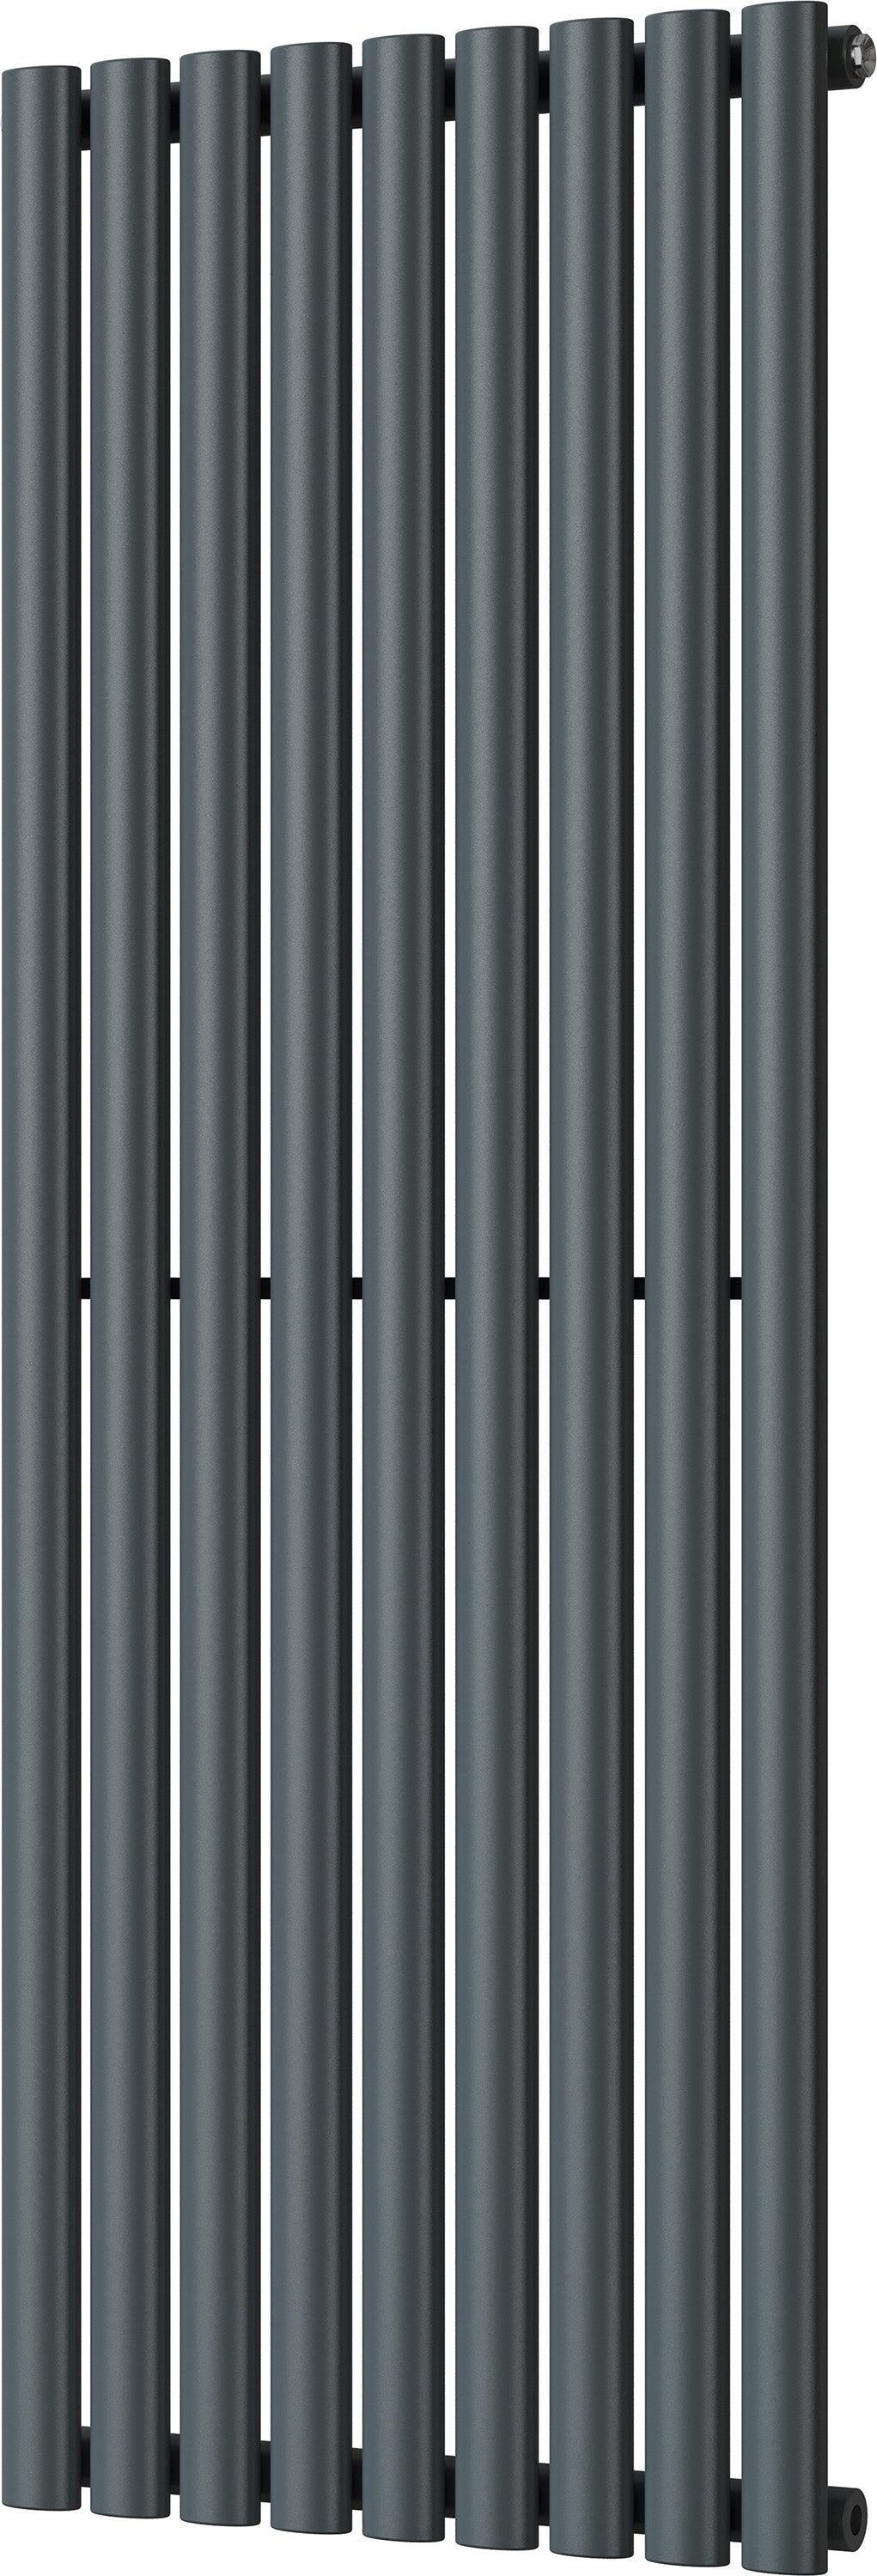 Omeara - Anthracite Vertical Radiator H1400mm x W522mm Single Panel